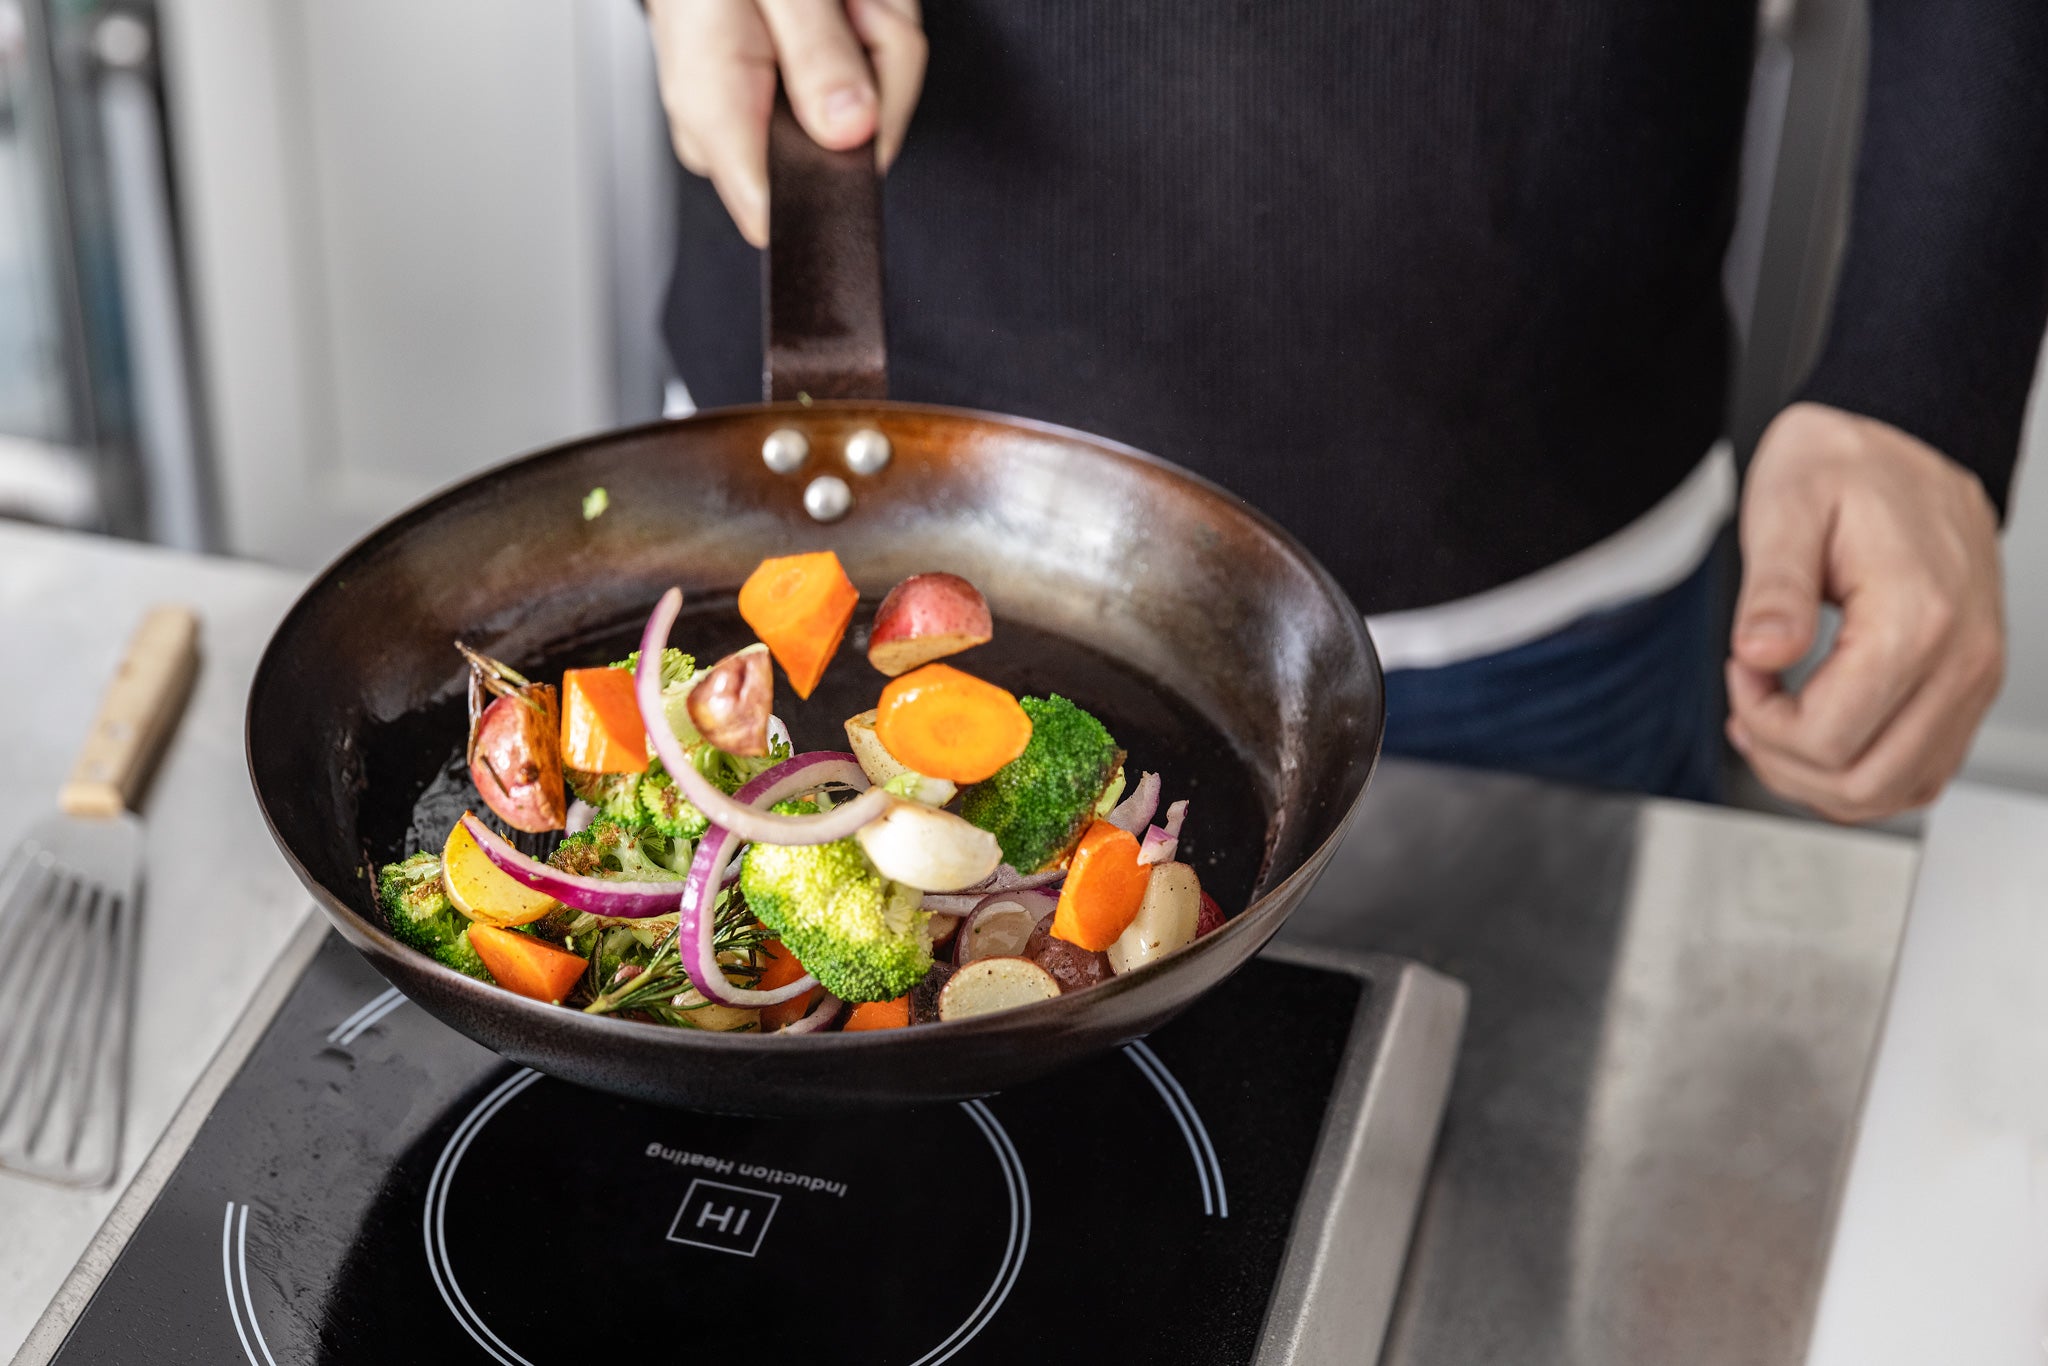 Here's everything you need to clean carbon steel pans in 6 steps